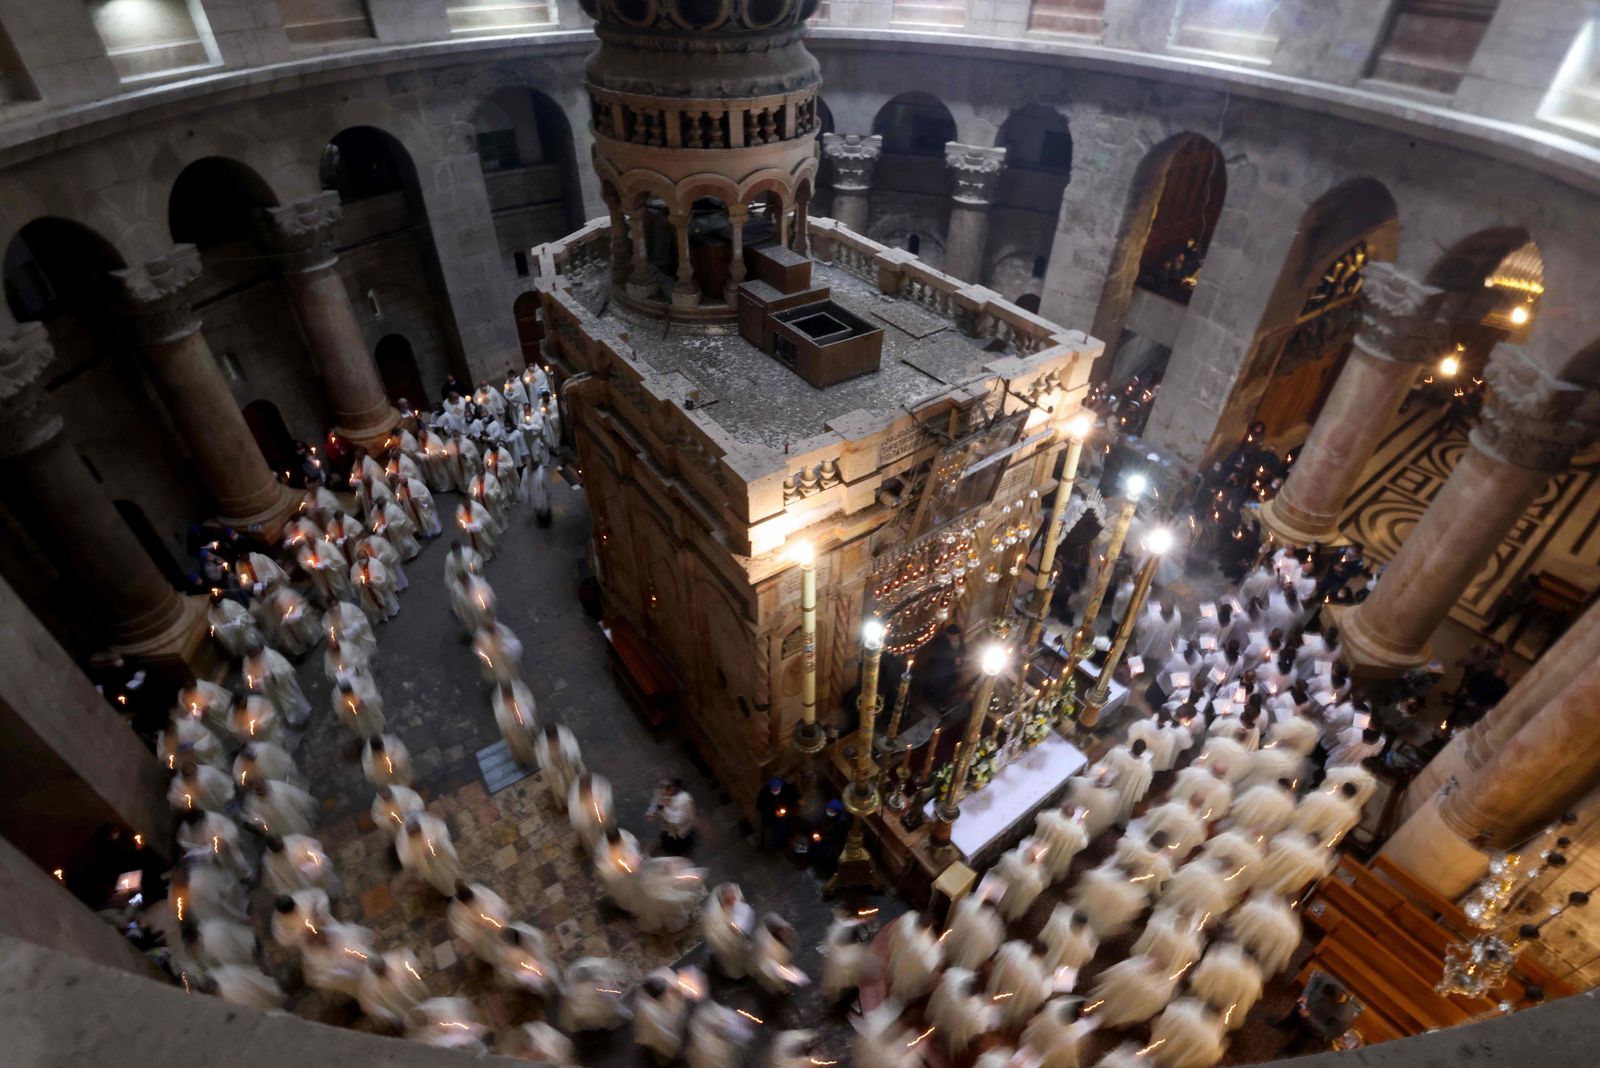 Christian worshippers, monks, and friars walk in procession around the Edicule, traditionally believed to be the burial site of Jesus Christ, during a mass to commemorate the Washing of the Feet on Holy Thursday, at the Church of the Holy Sepulchre in Jerusalem, on April 1, 2021. - Holy Thursday or Maundy Thursday is the Christian day falling before Easter which commemorates the Washing of the Feet and the Last Supper of Jesus Christ with the apostles. (Photo by Emmanuel DUNAND / AFP) - AFP